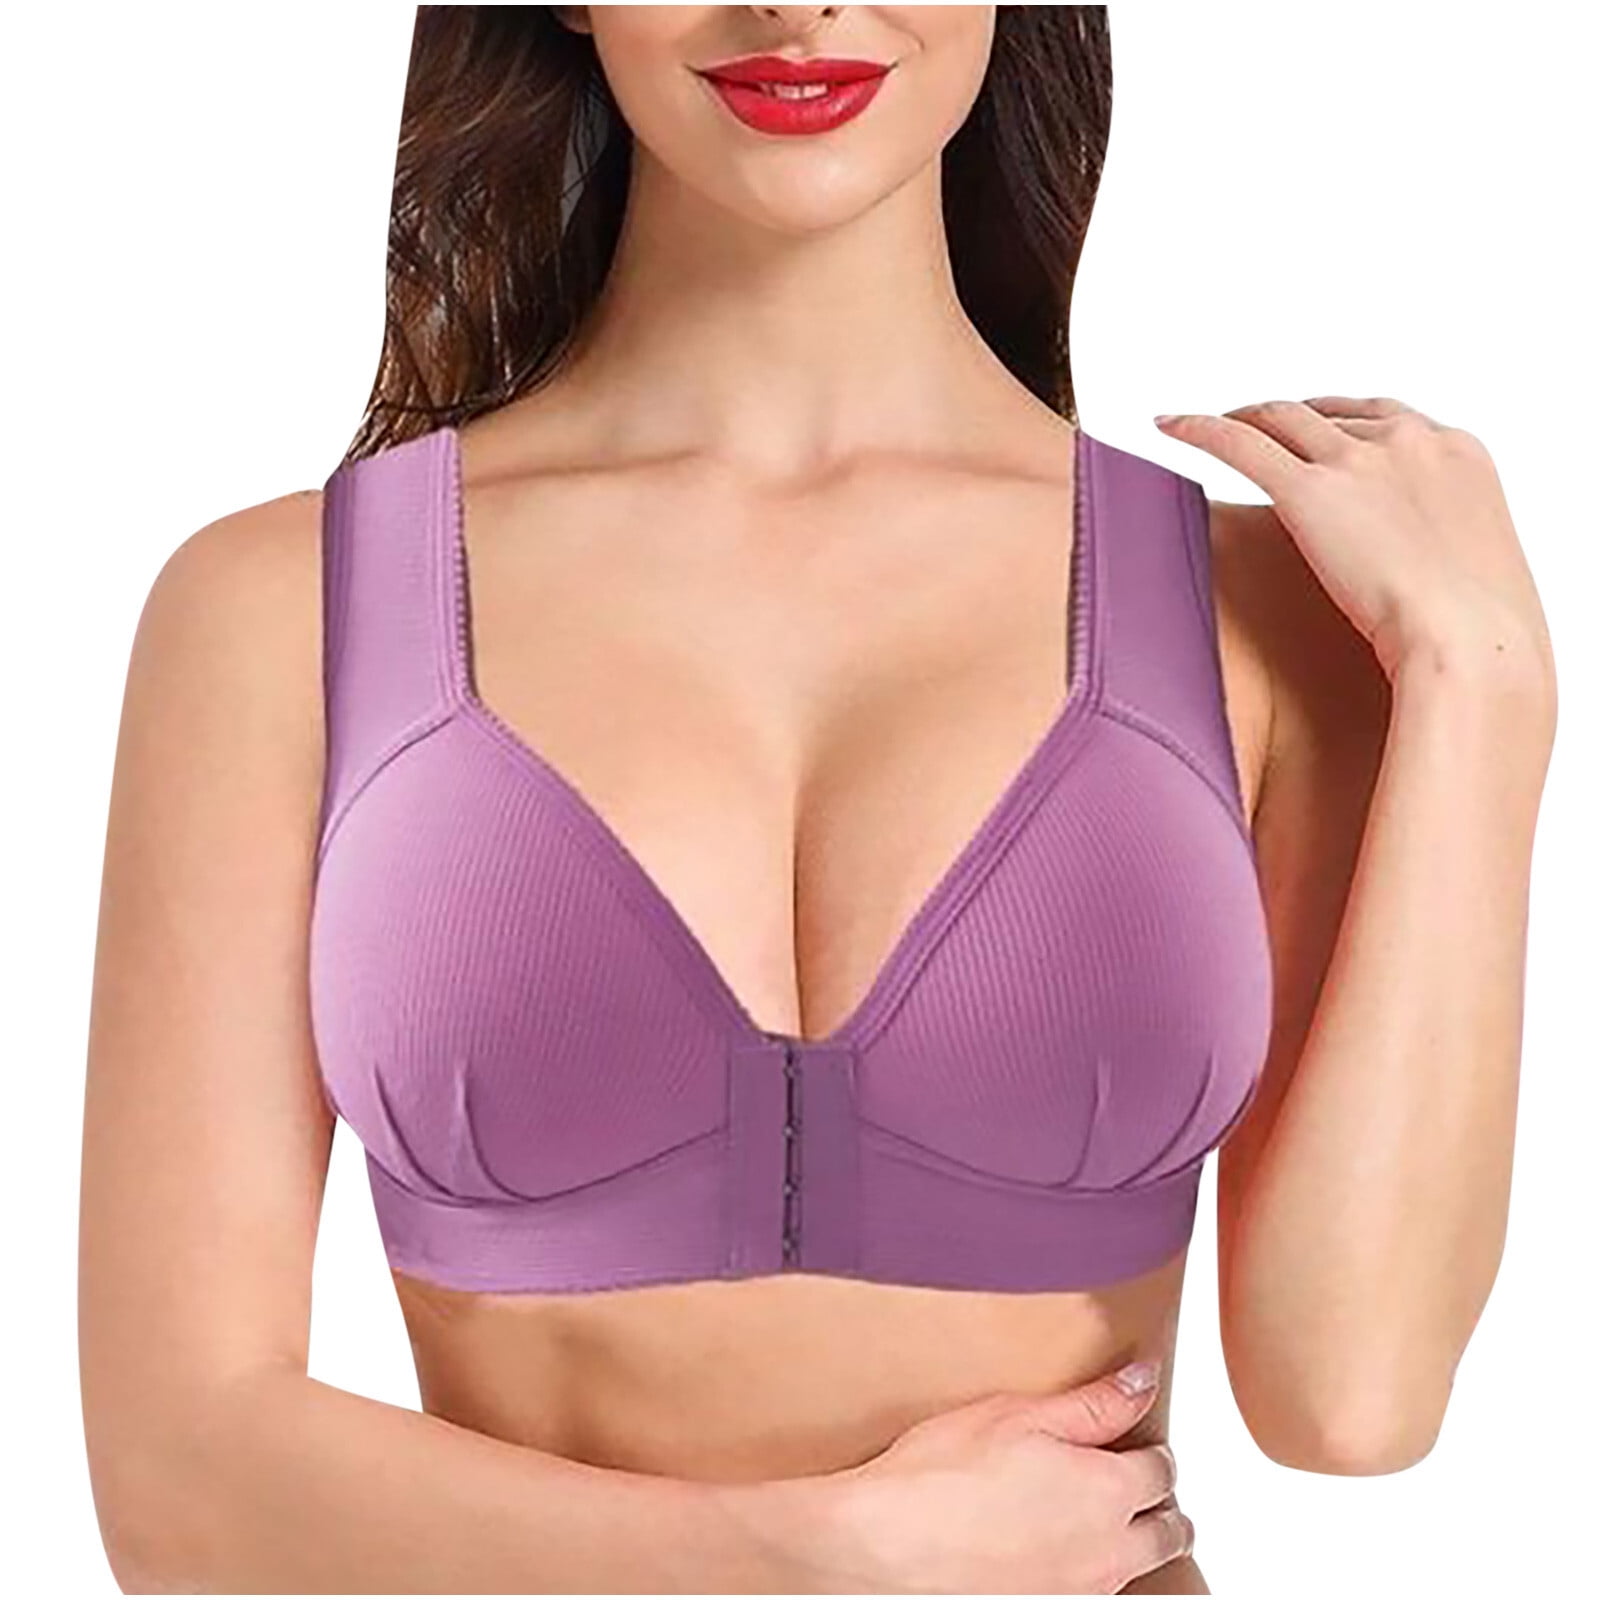 CHGBMOK Women's Front Closure Wireless Bra, Perfect Plus Size Stretch  Push-Up Bra, Convertible Bras for Women with Adjustable Shoulder Straps on